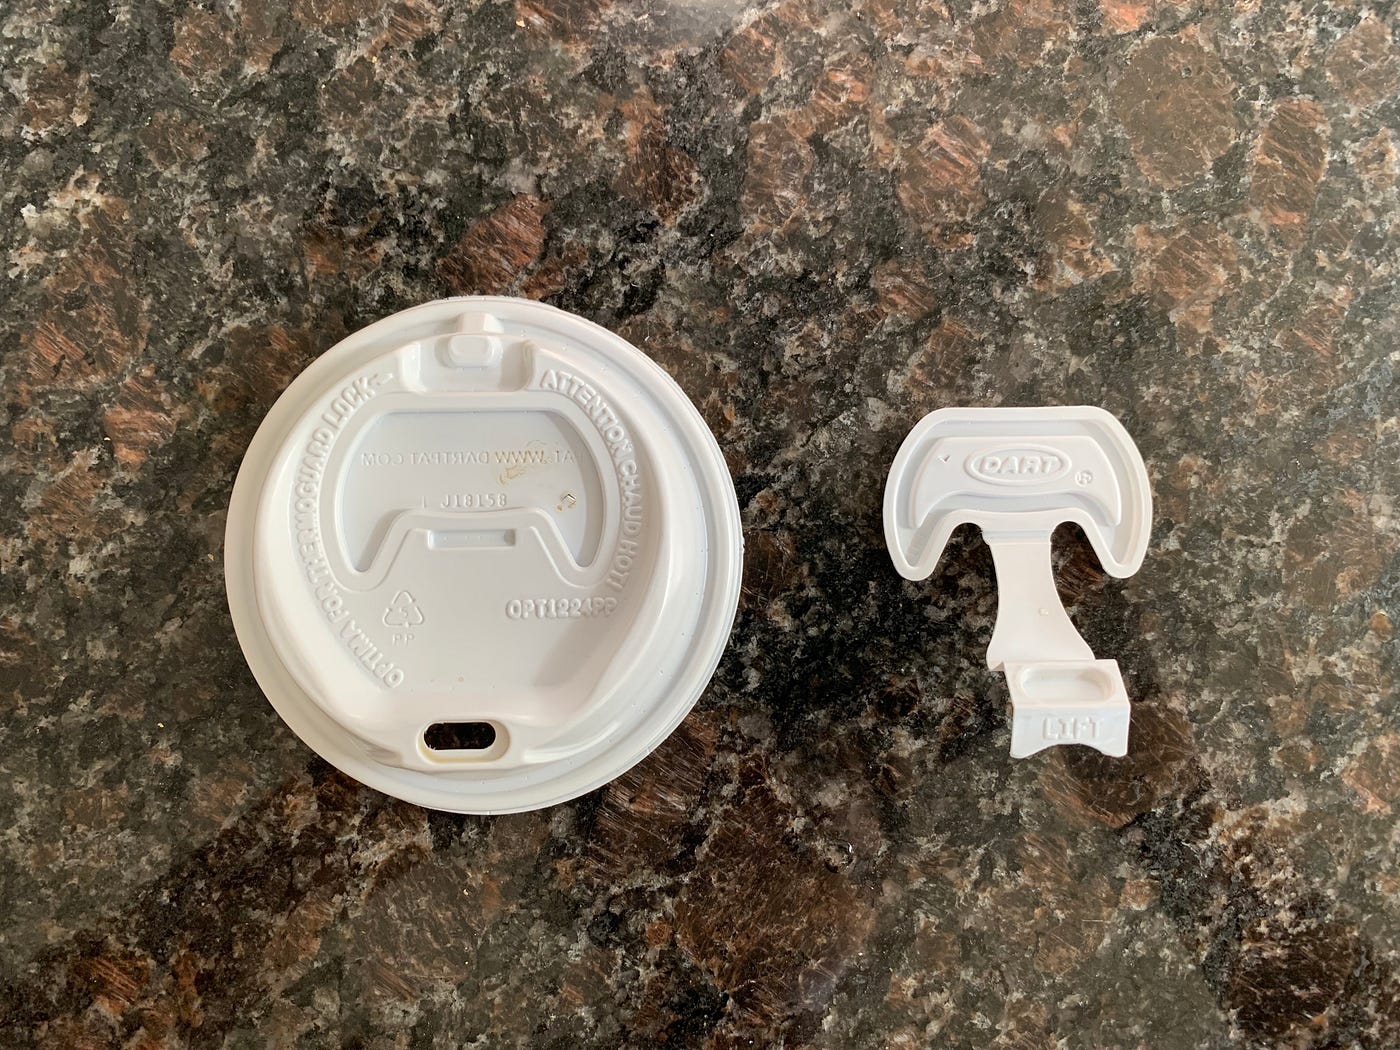 The Case of the Dunkin' Coffee Lid, by Sarah Chang